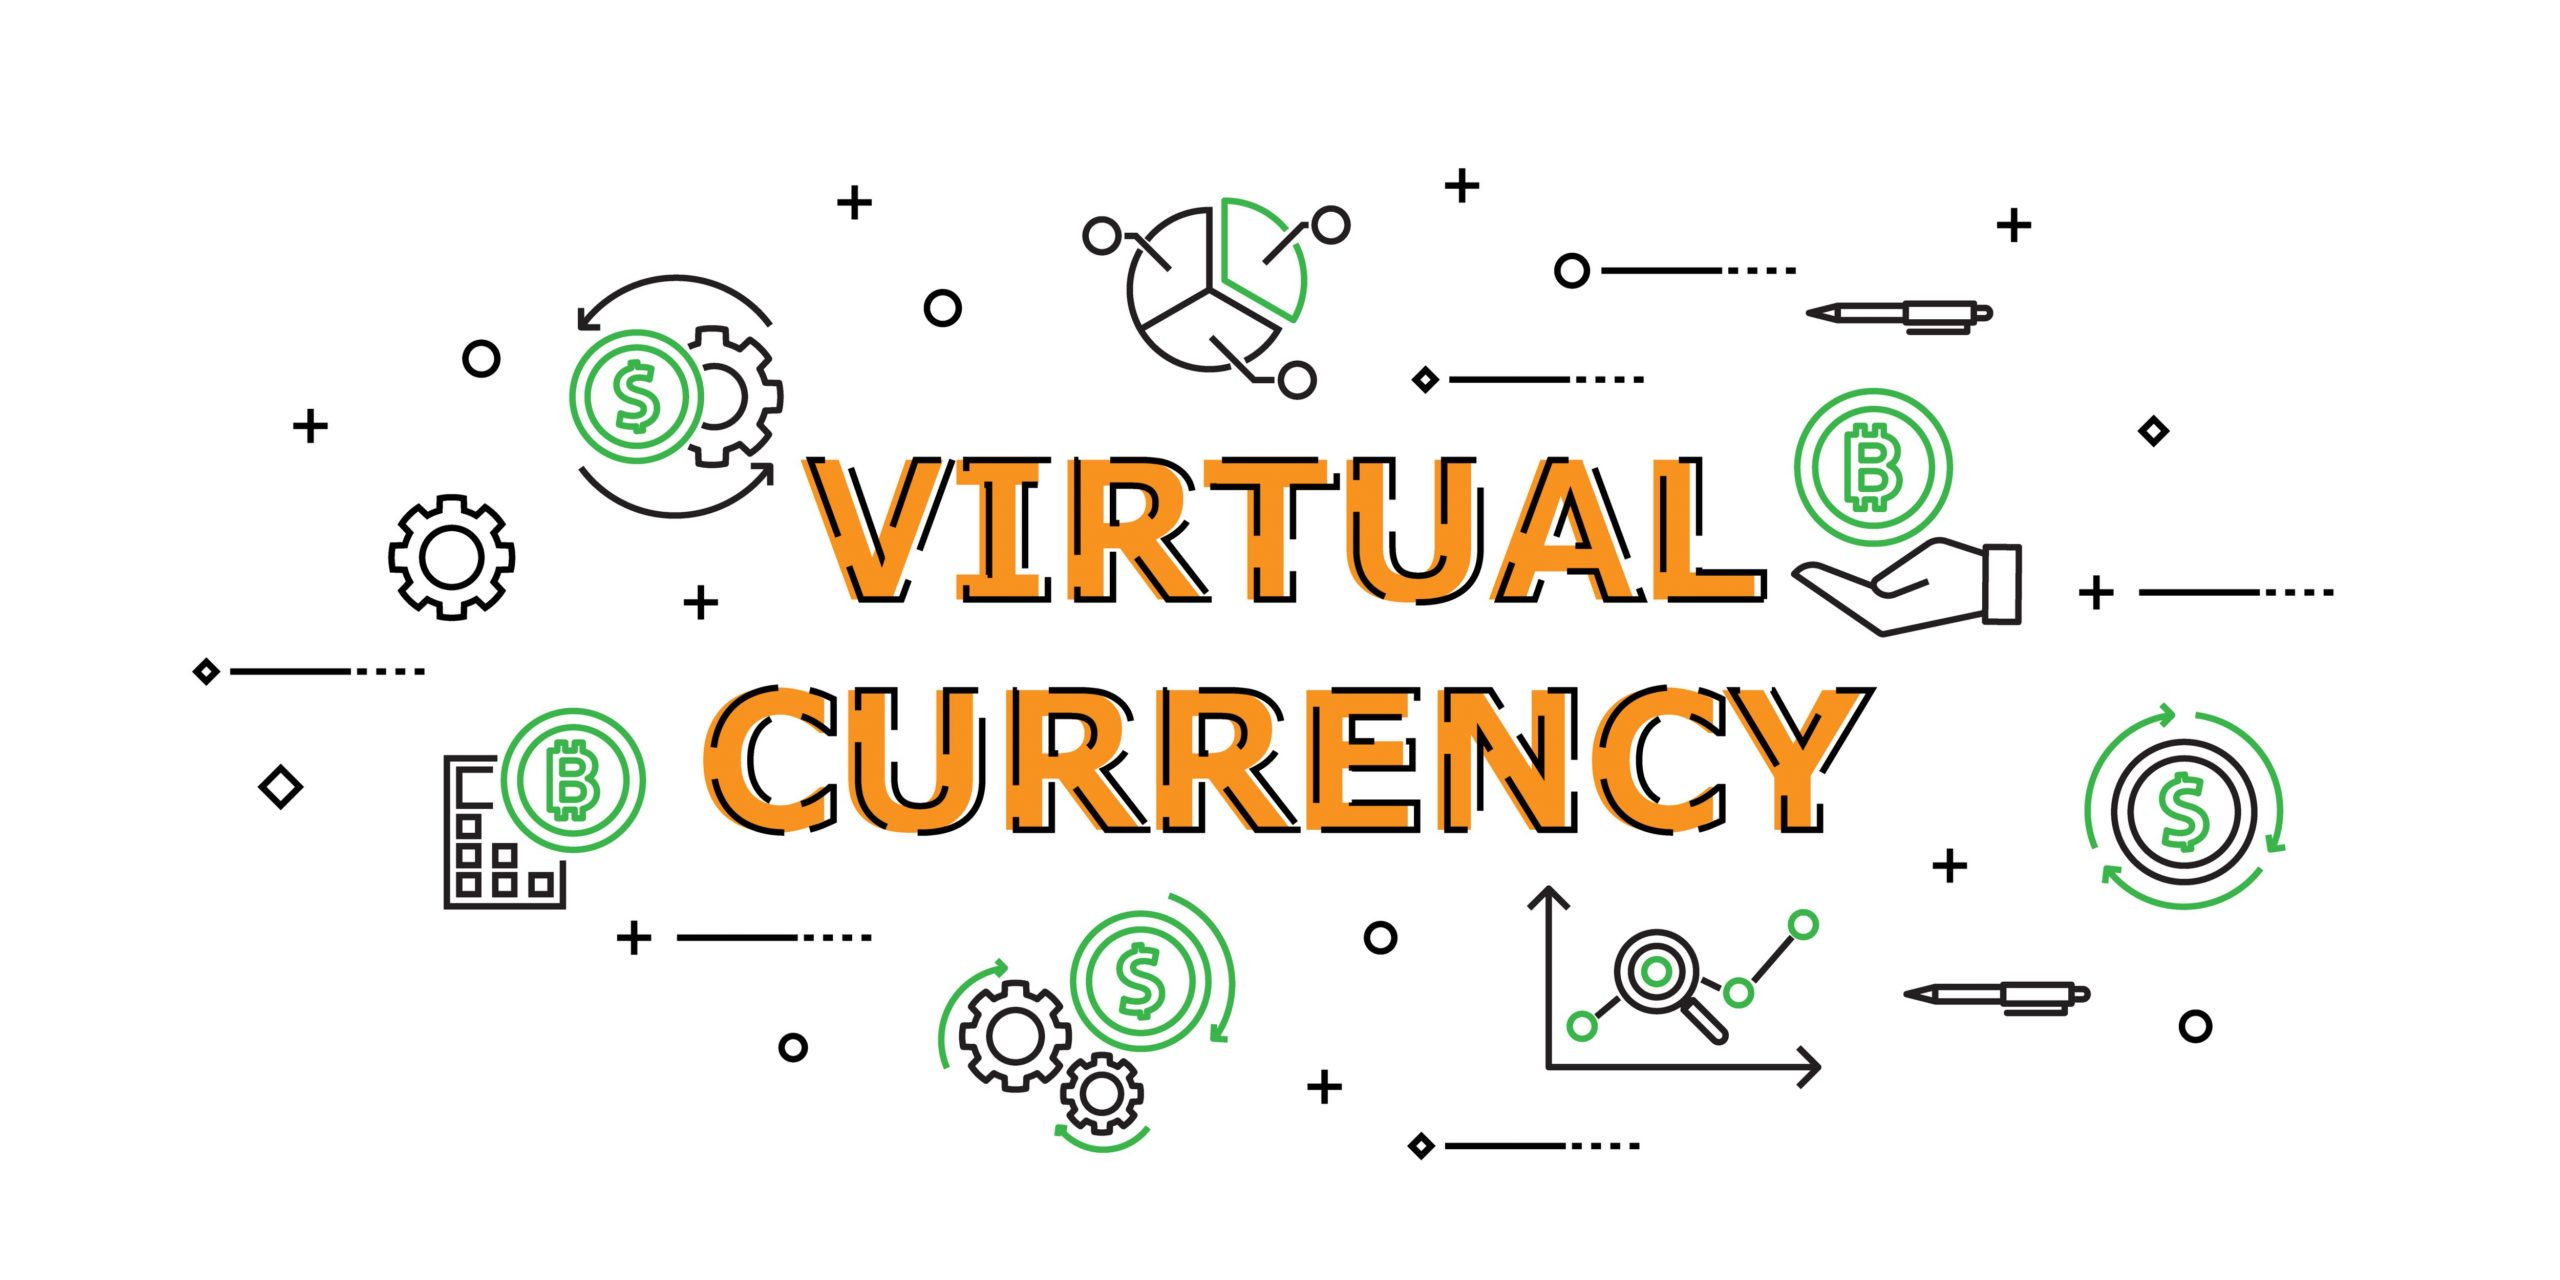 what is considered virtual currency